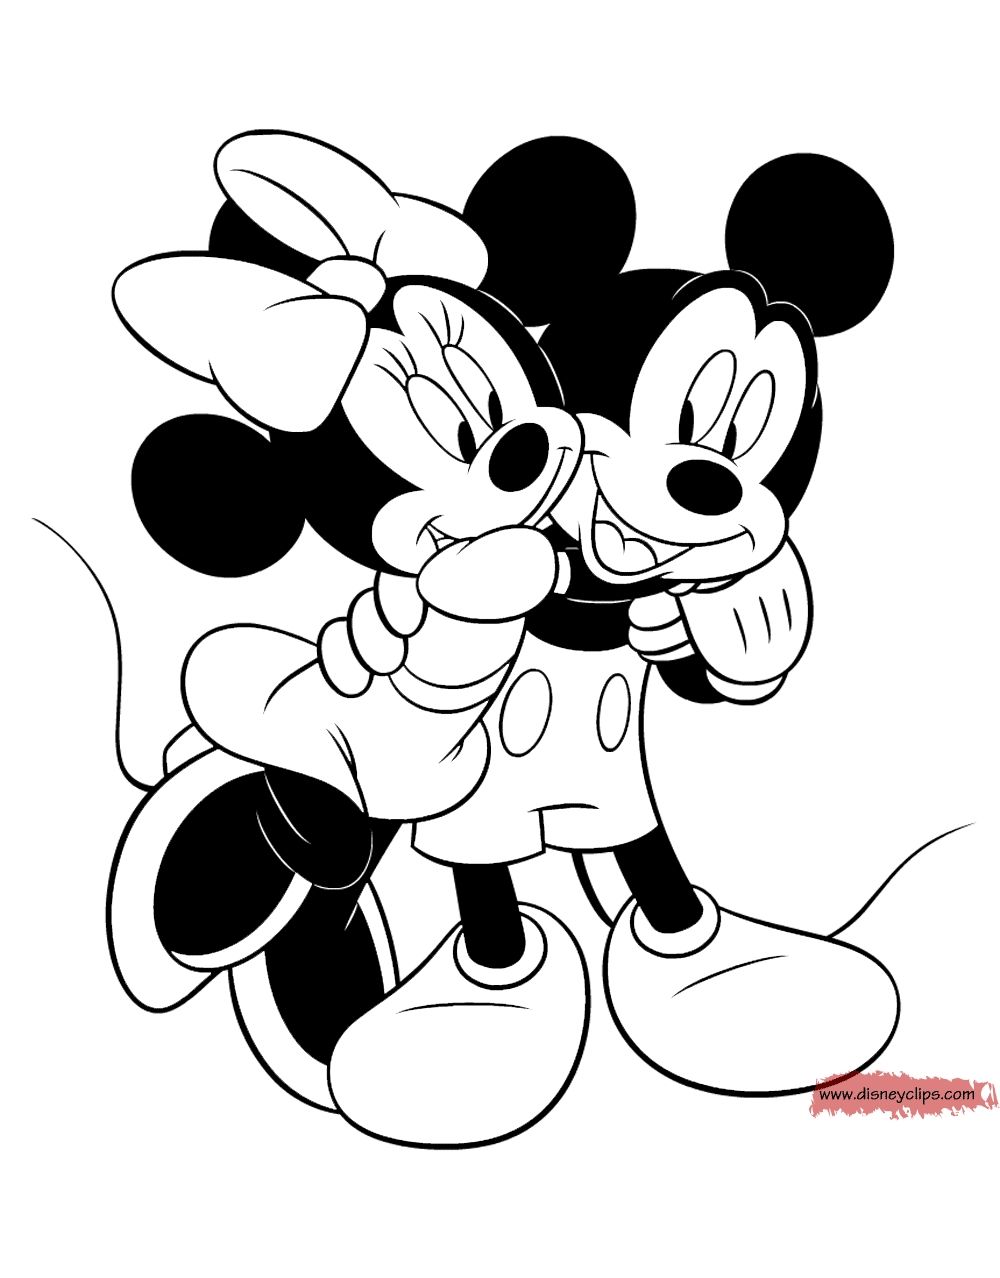 Mickey And Minnie Mouse Kissing Coloring Pages at